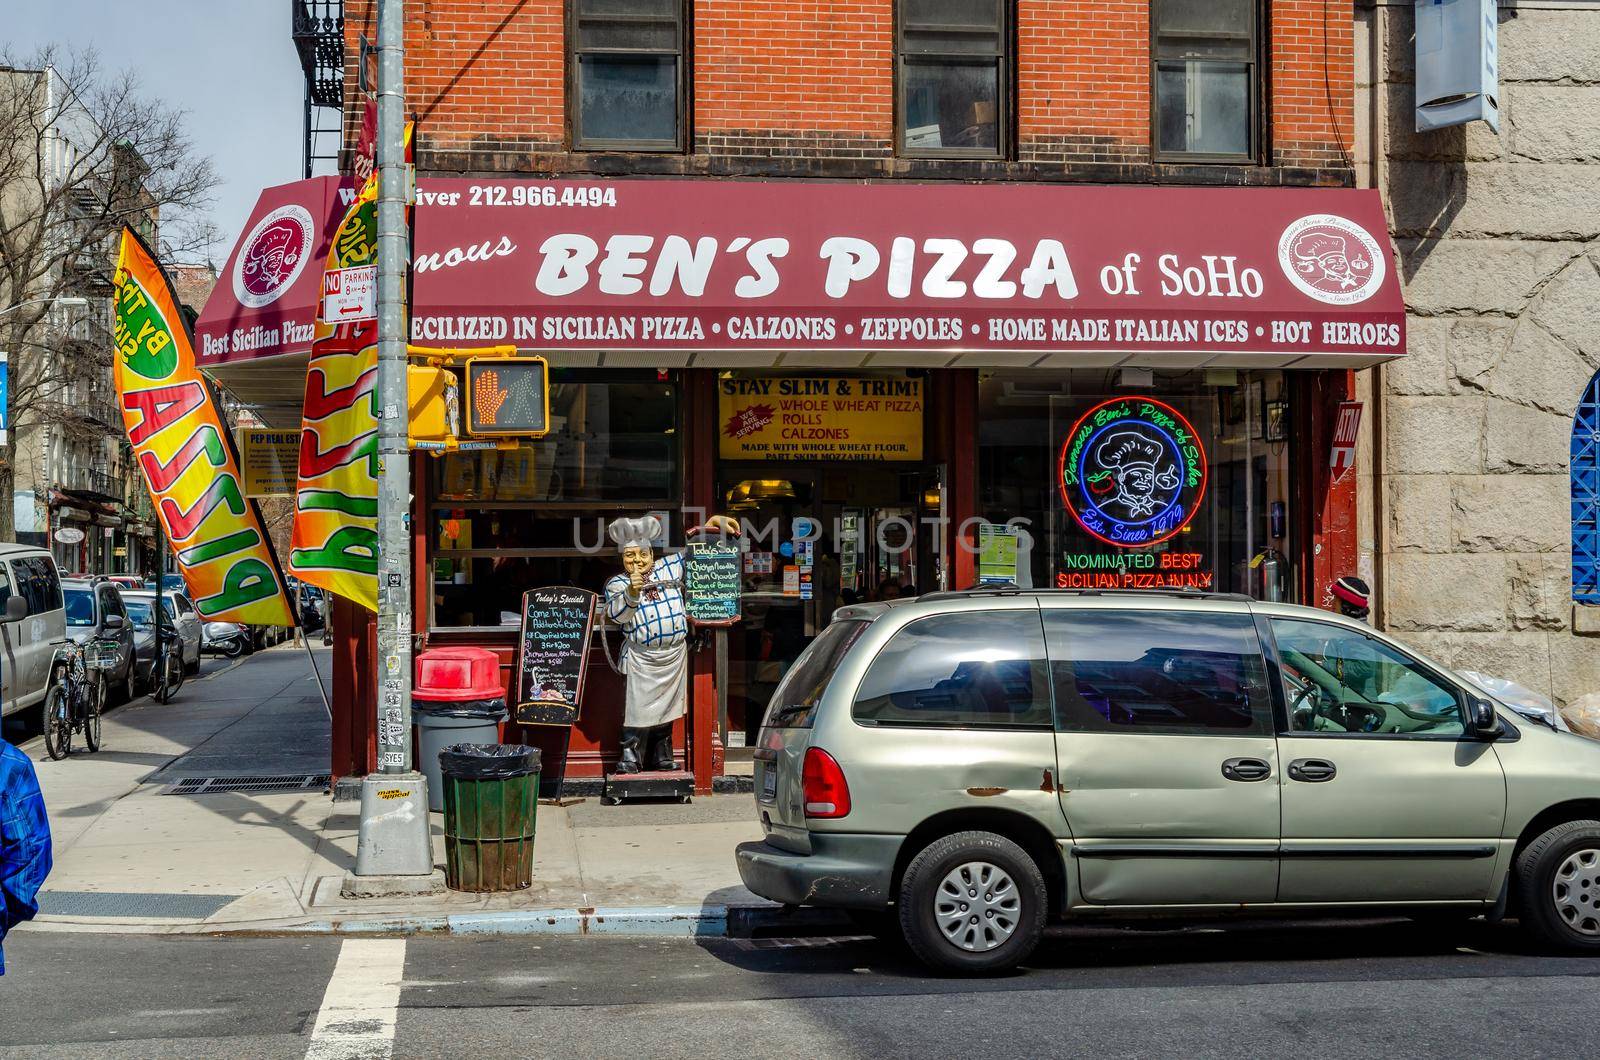 Ben's Pizza of SoHo Italian Restaurant close-up with Car parked in front, New York City during sunny winter day, horizontal